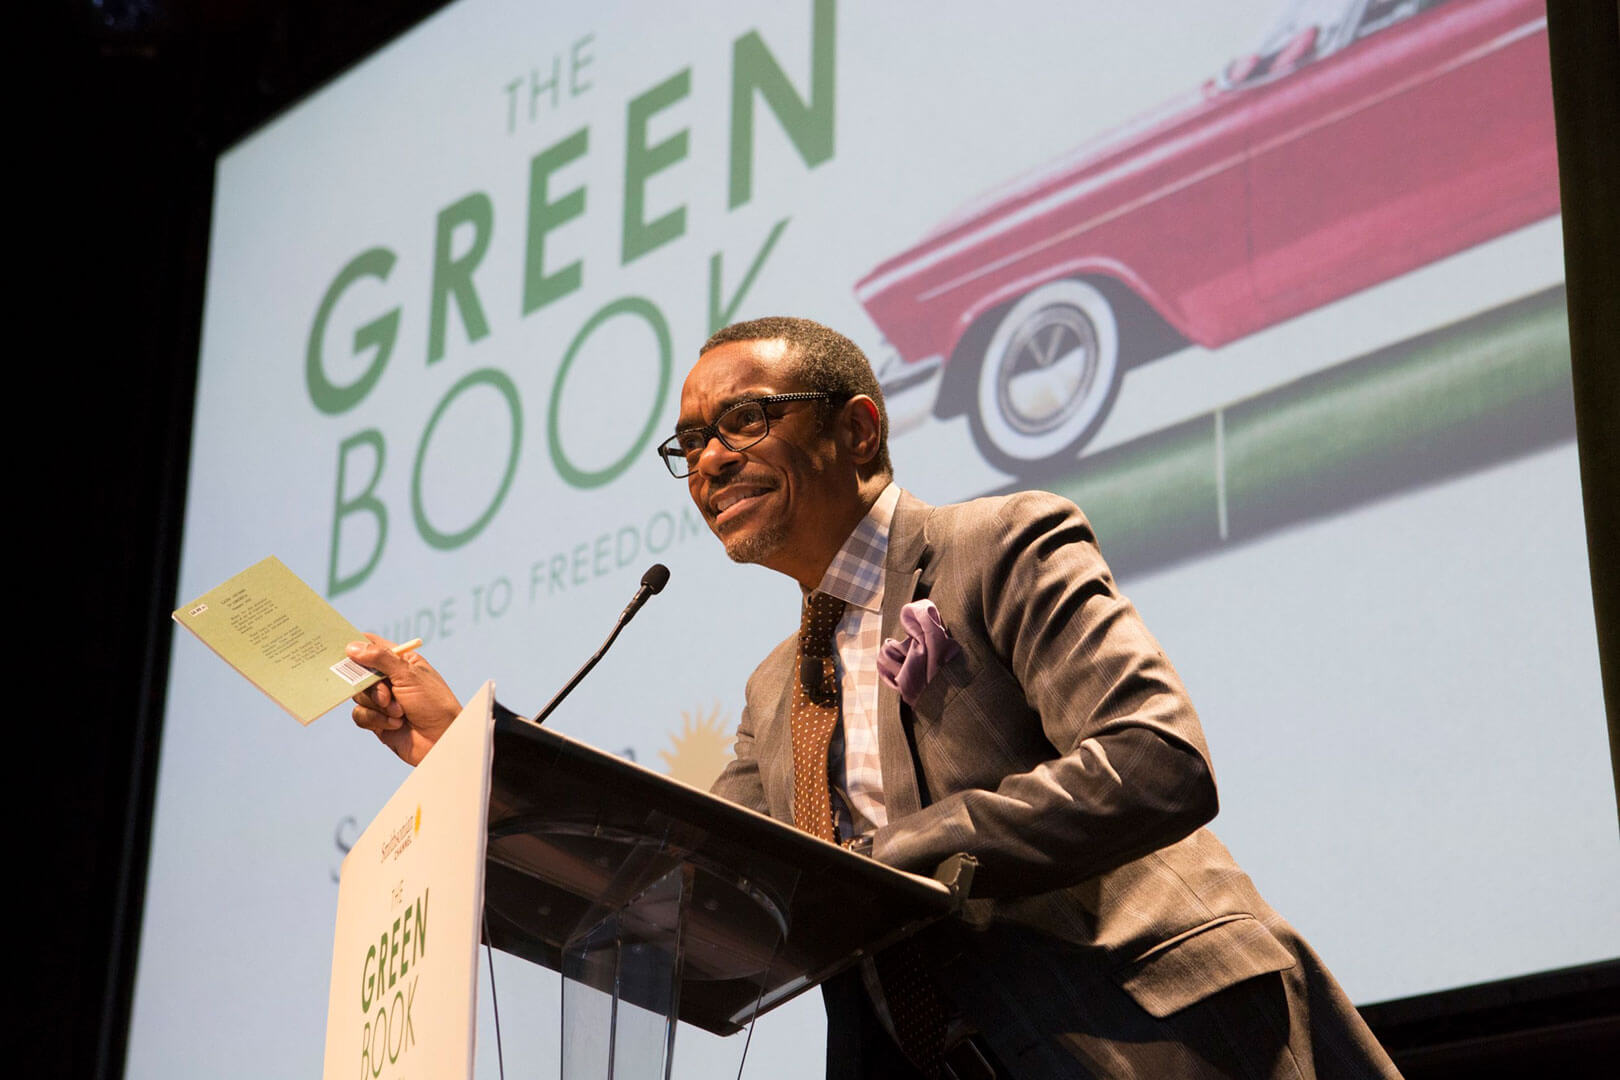 The Green Book Guide To Freedom